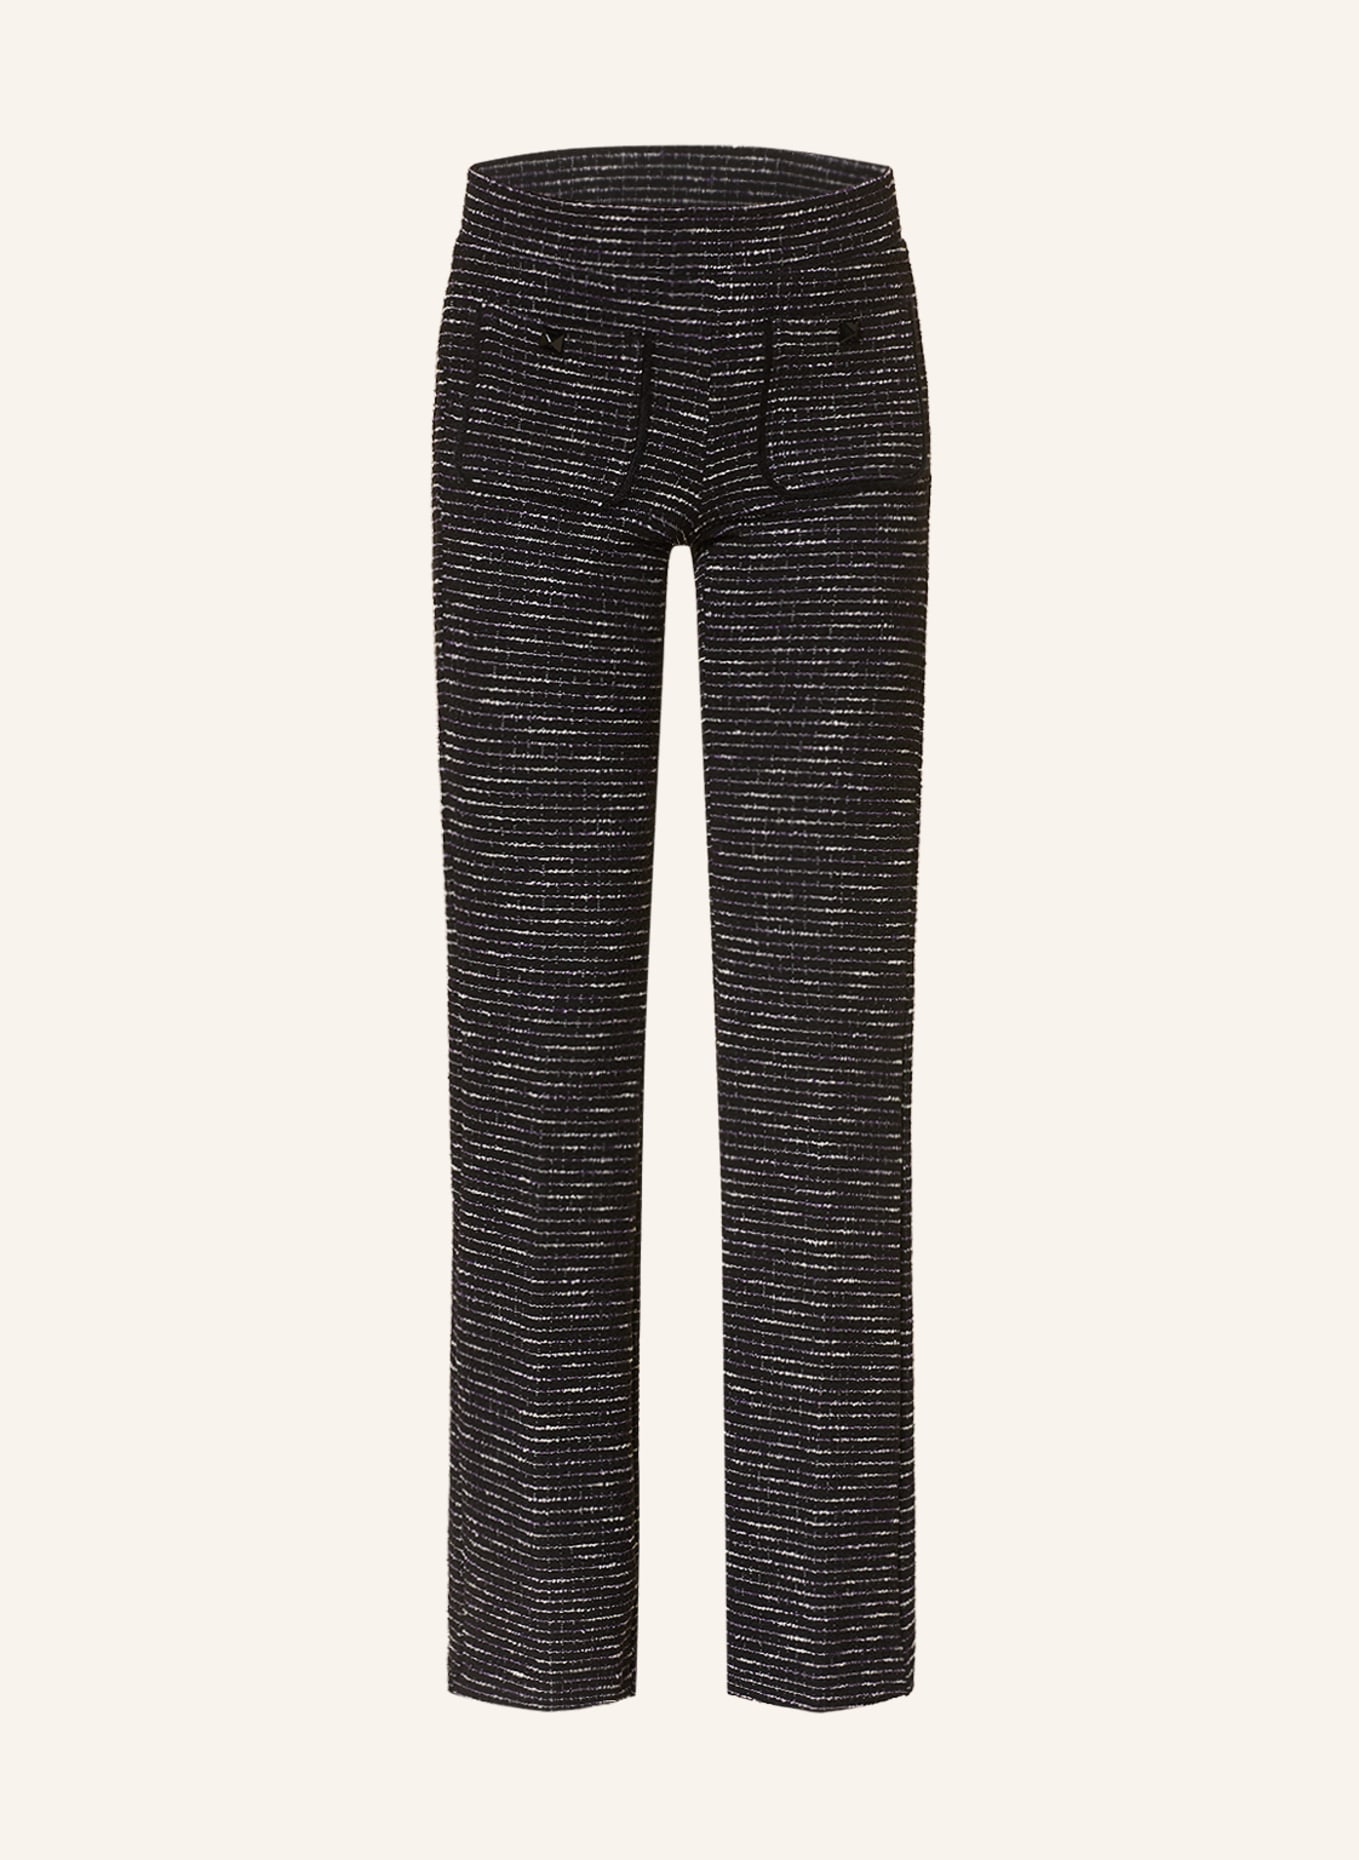 CAMBIO Wide leg trousers FRANCIS made of tweed, Color: BLACK/ WHITE/ PURPLE (Image 1)